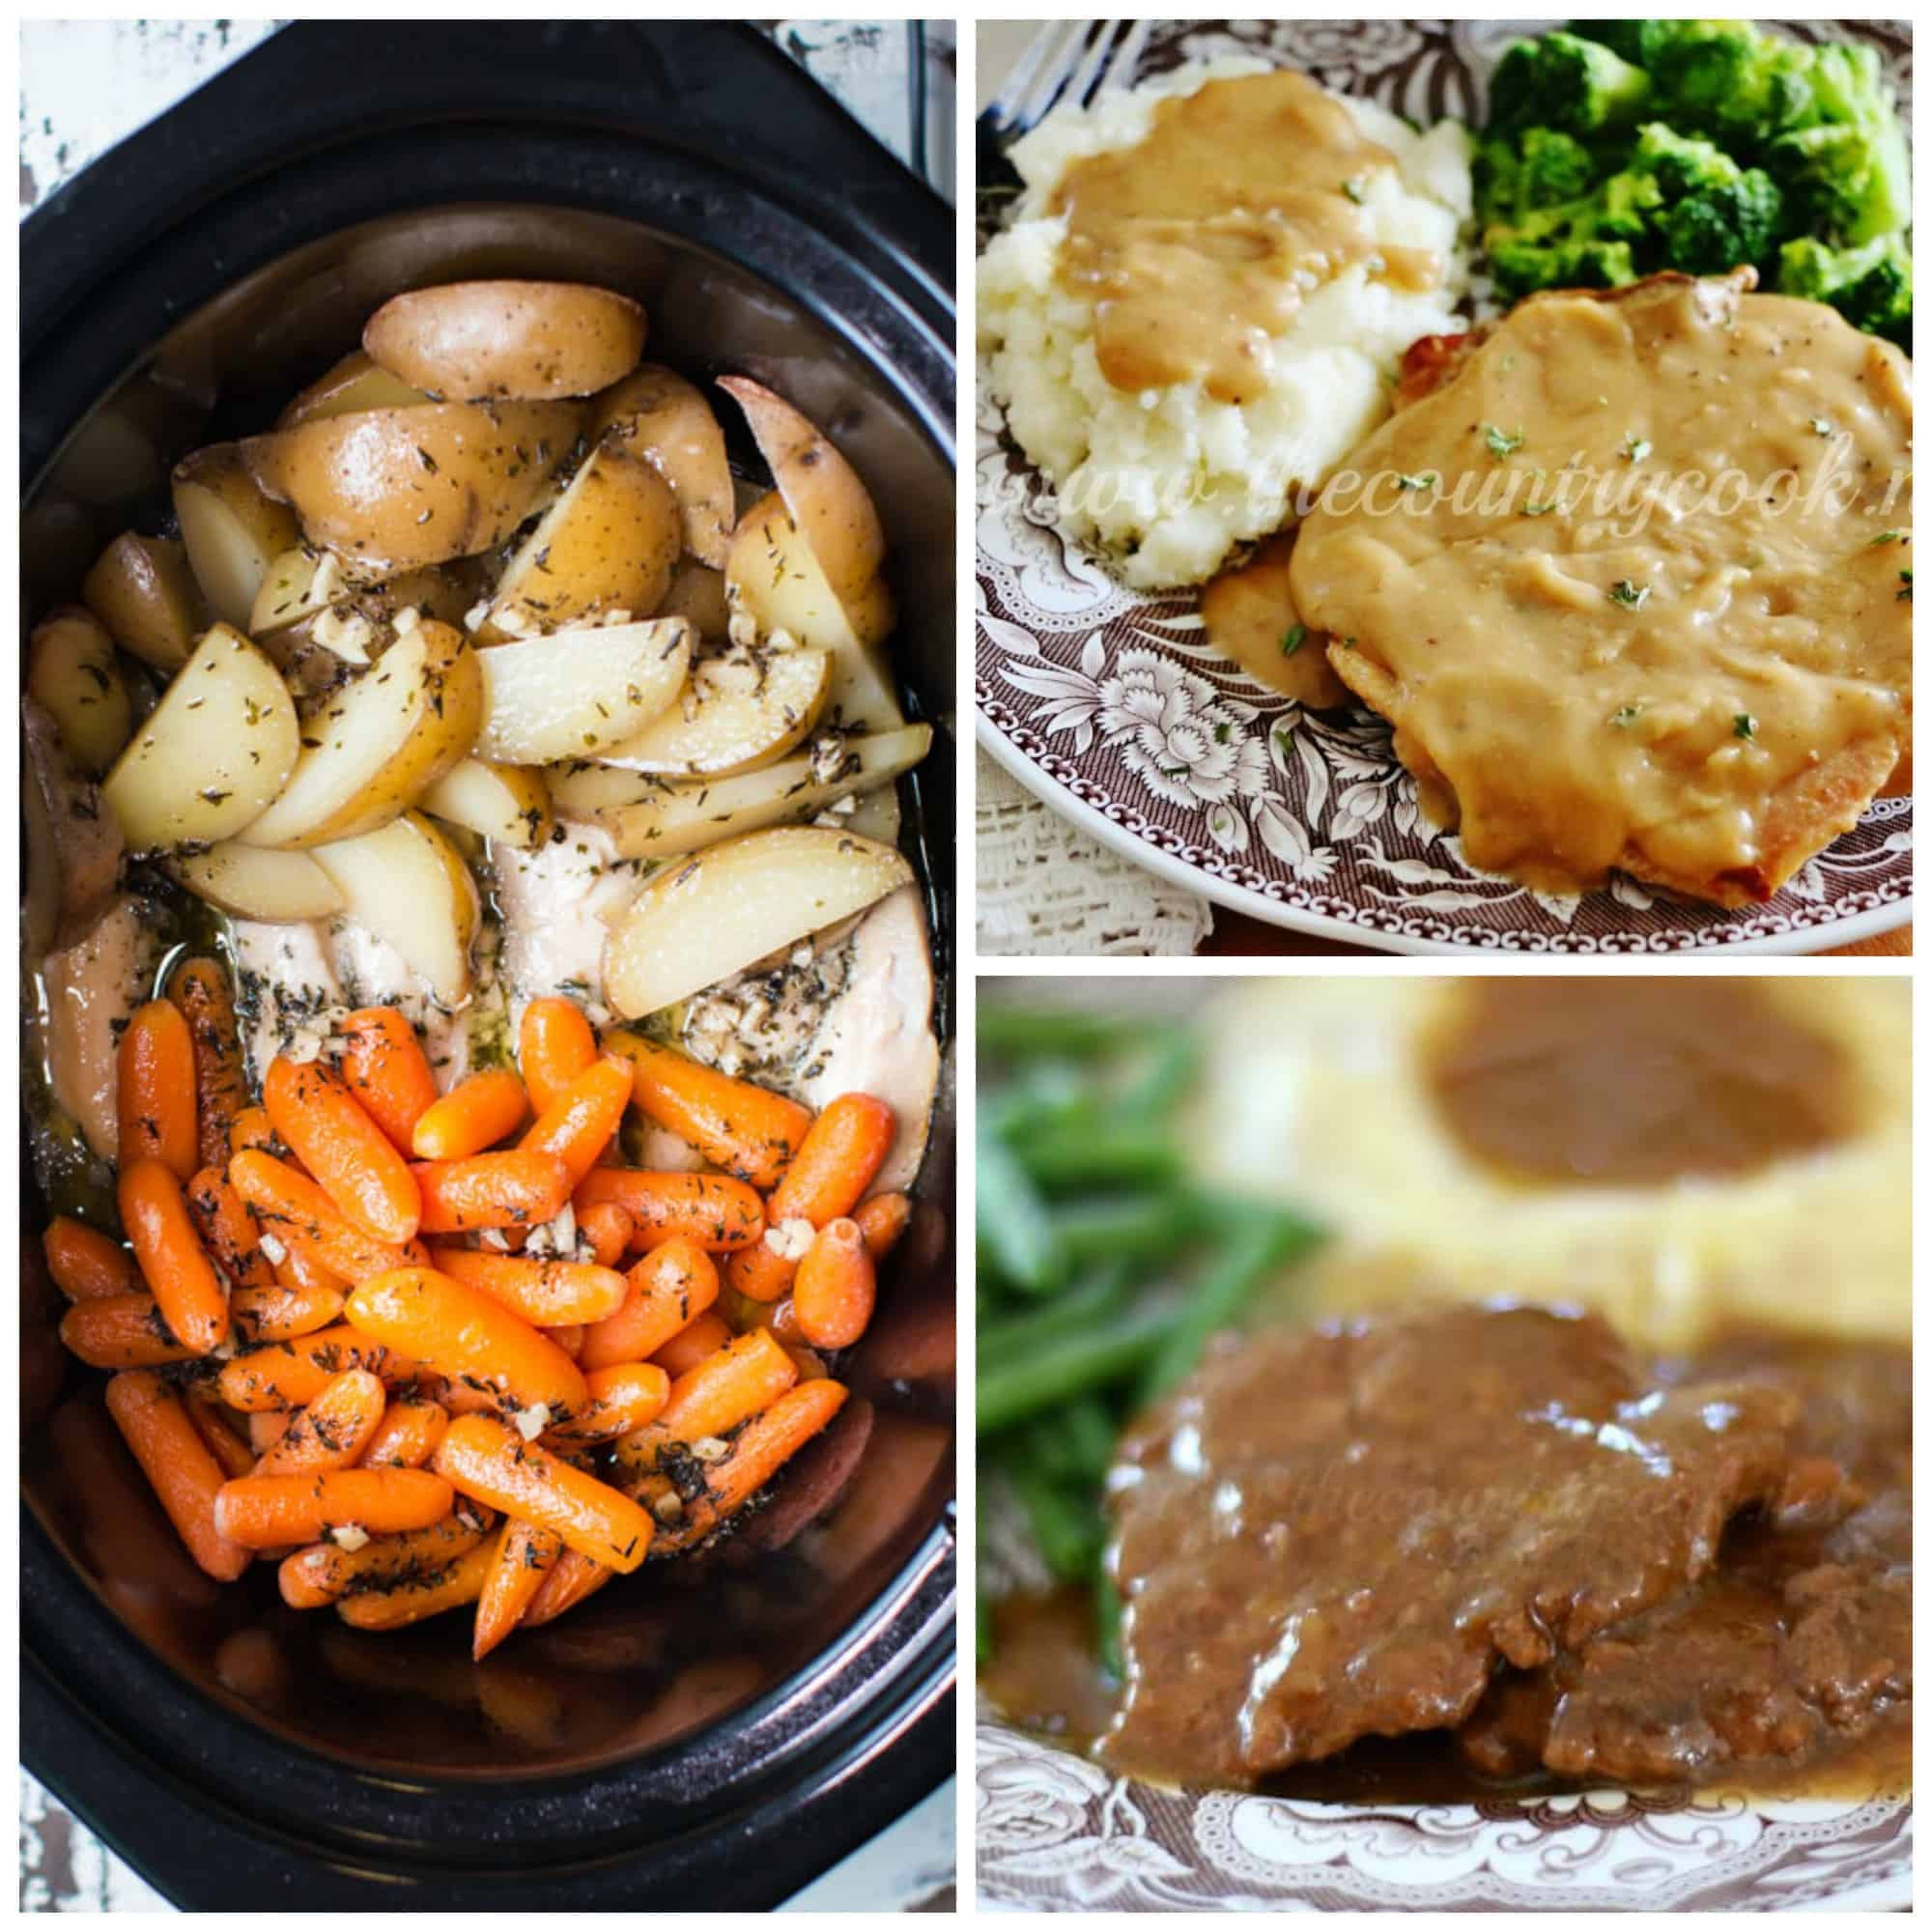 Good Winter Dinners
 15 Easy Slow Cooker Dinner Recipes that will Warm You Up